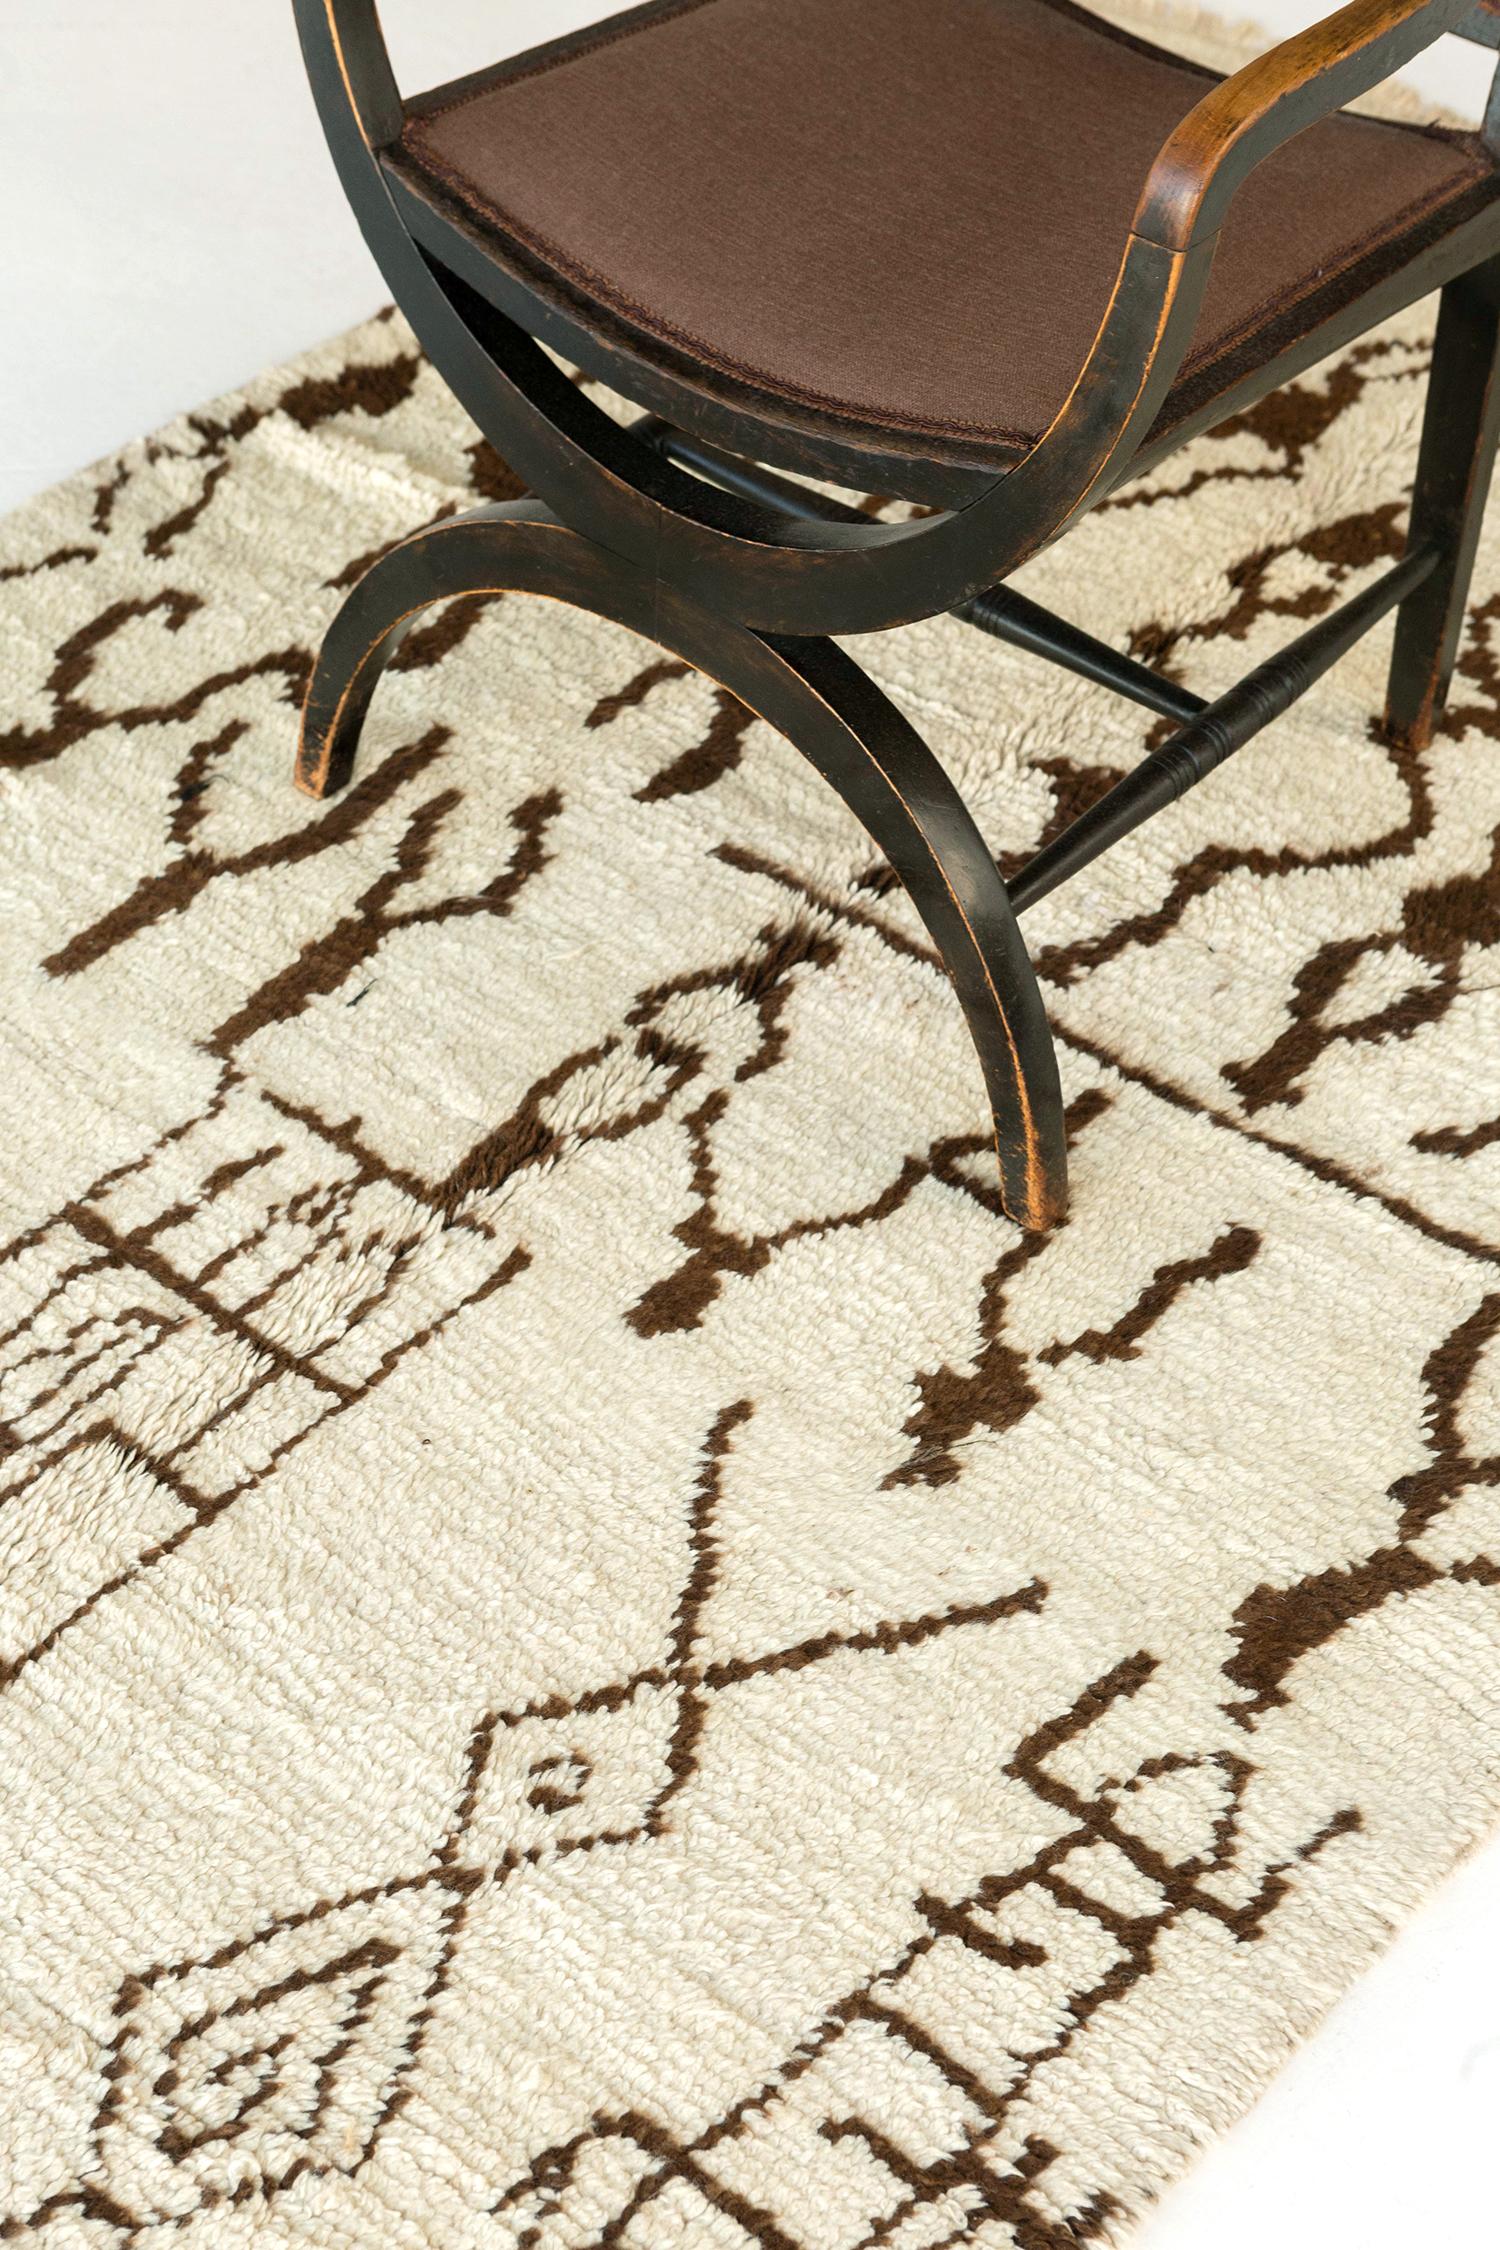 Fancify your room with our Azilal Tribe Moroccan rug from Atlas Collection. It highlights the hazel-outlined chevrons, eye, diamonds, lozenges with extended sides, zigzags, and other ambiguous Berber symbols in an off- white field. A centerpiece